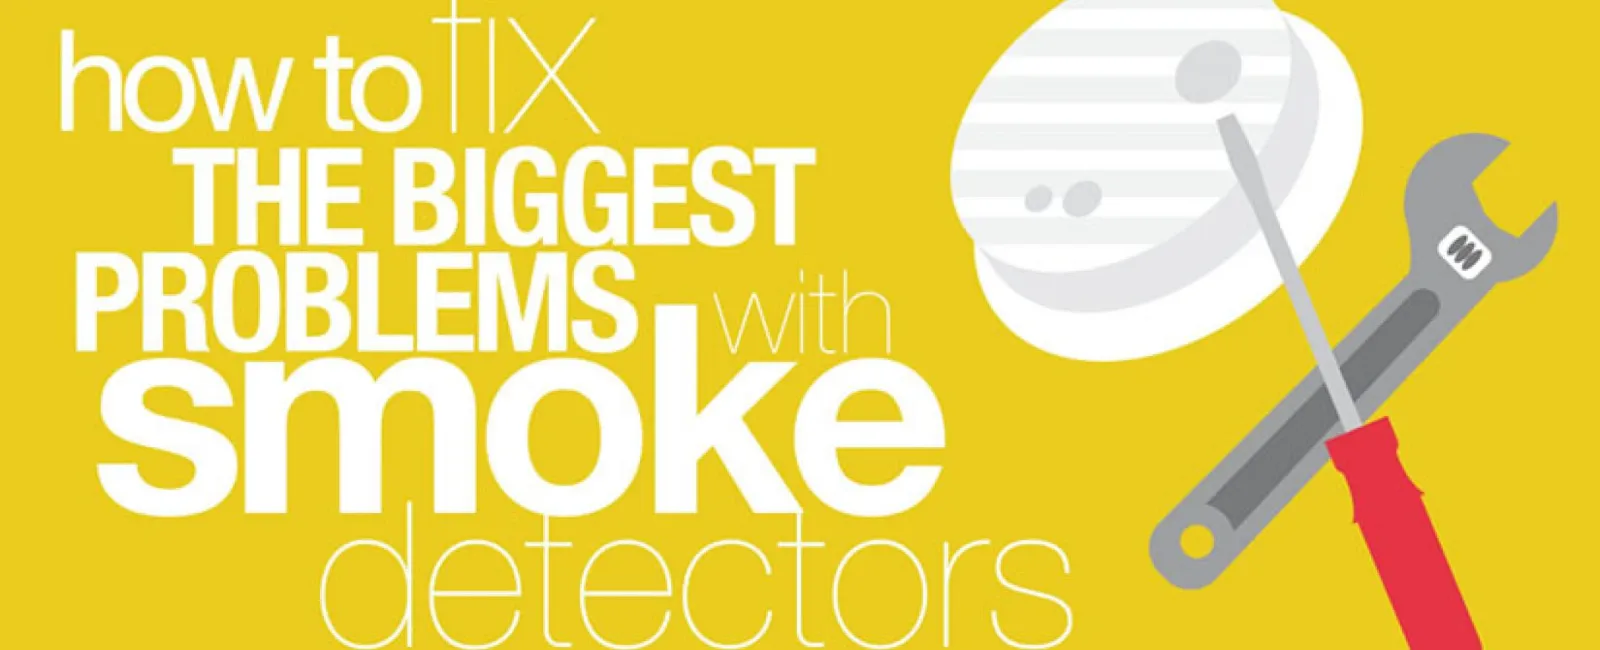 The Biggest Problems with Smoke Detectors